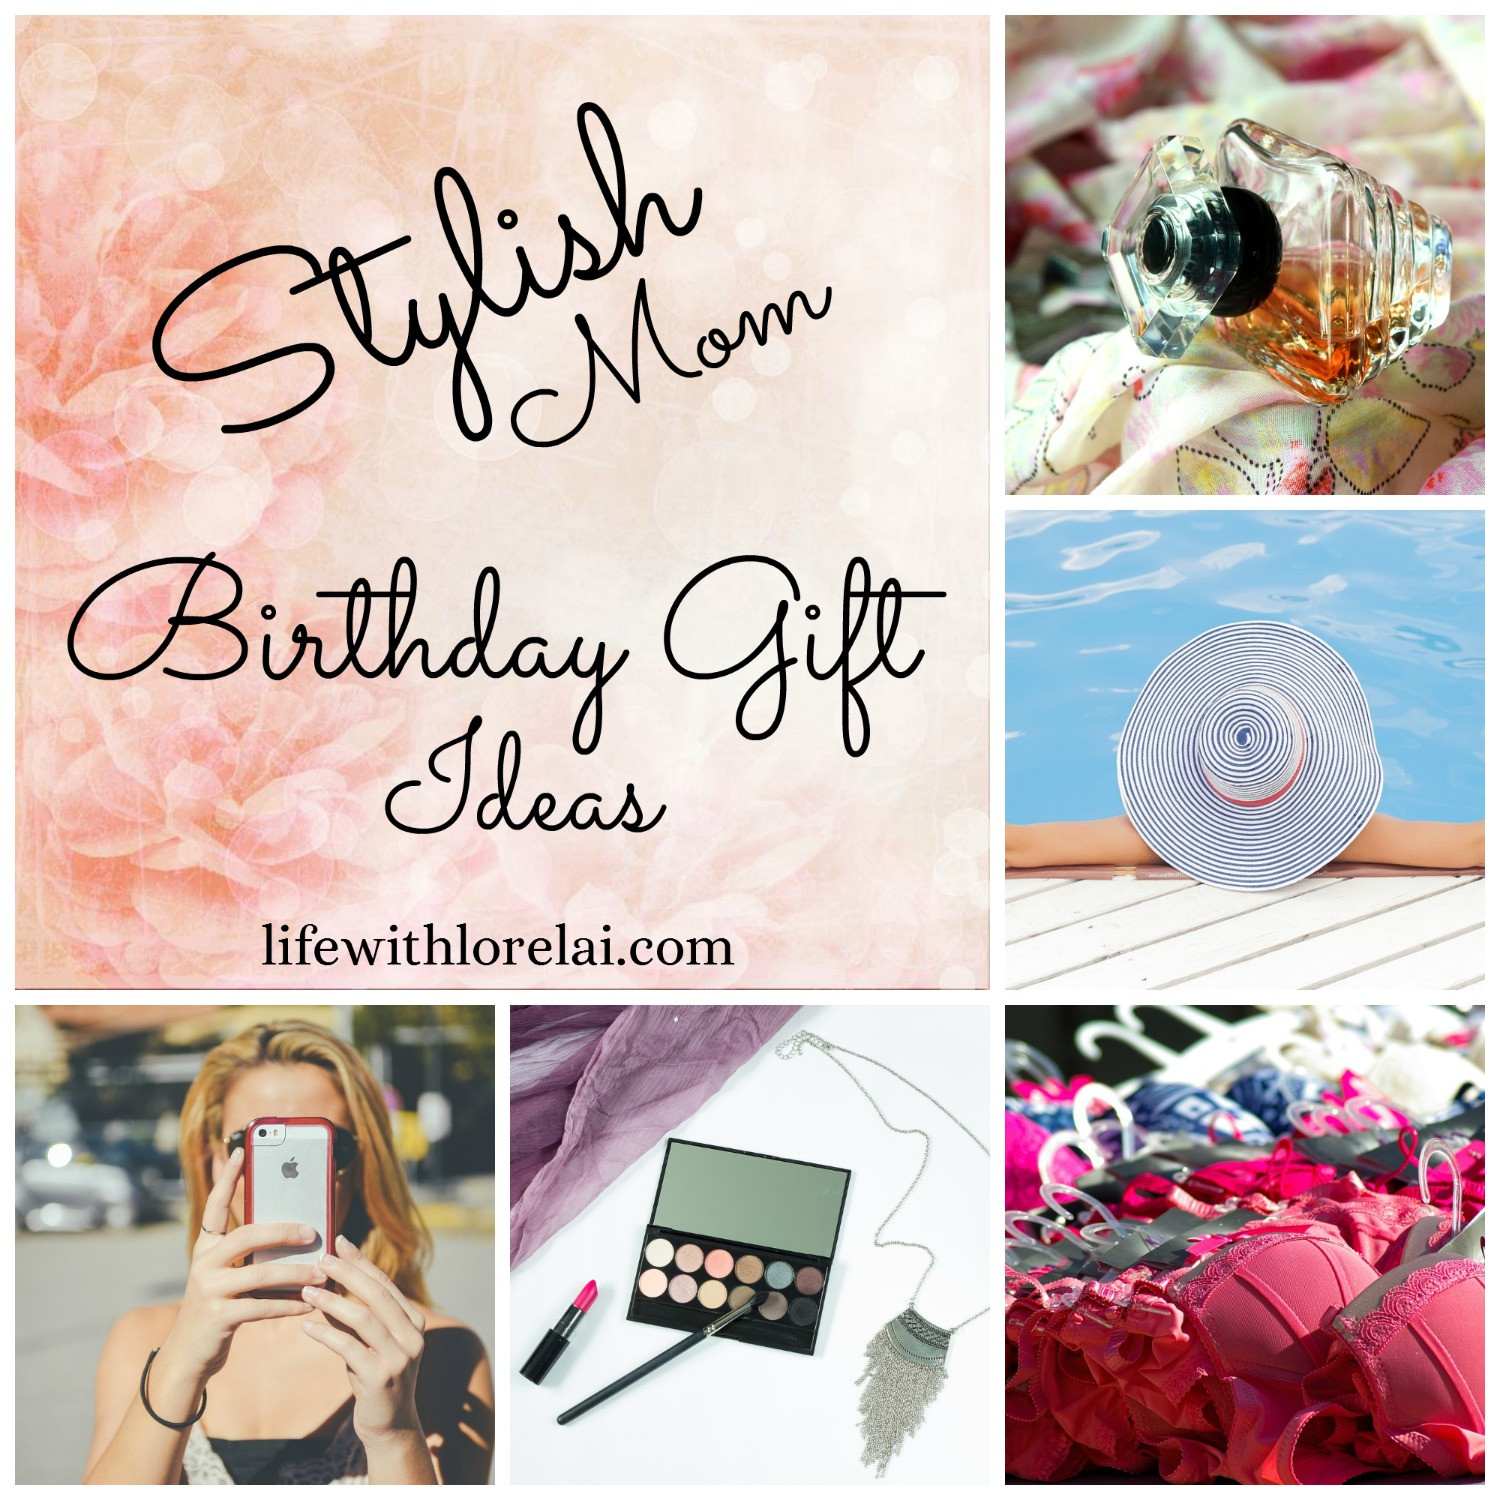 Mothers Birthday Gift Ideas
 Birthday Gift Ideas For The Stylish Mom Life With Lorelai